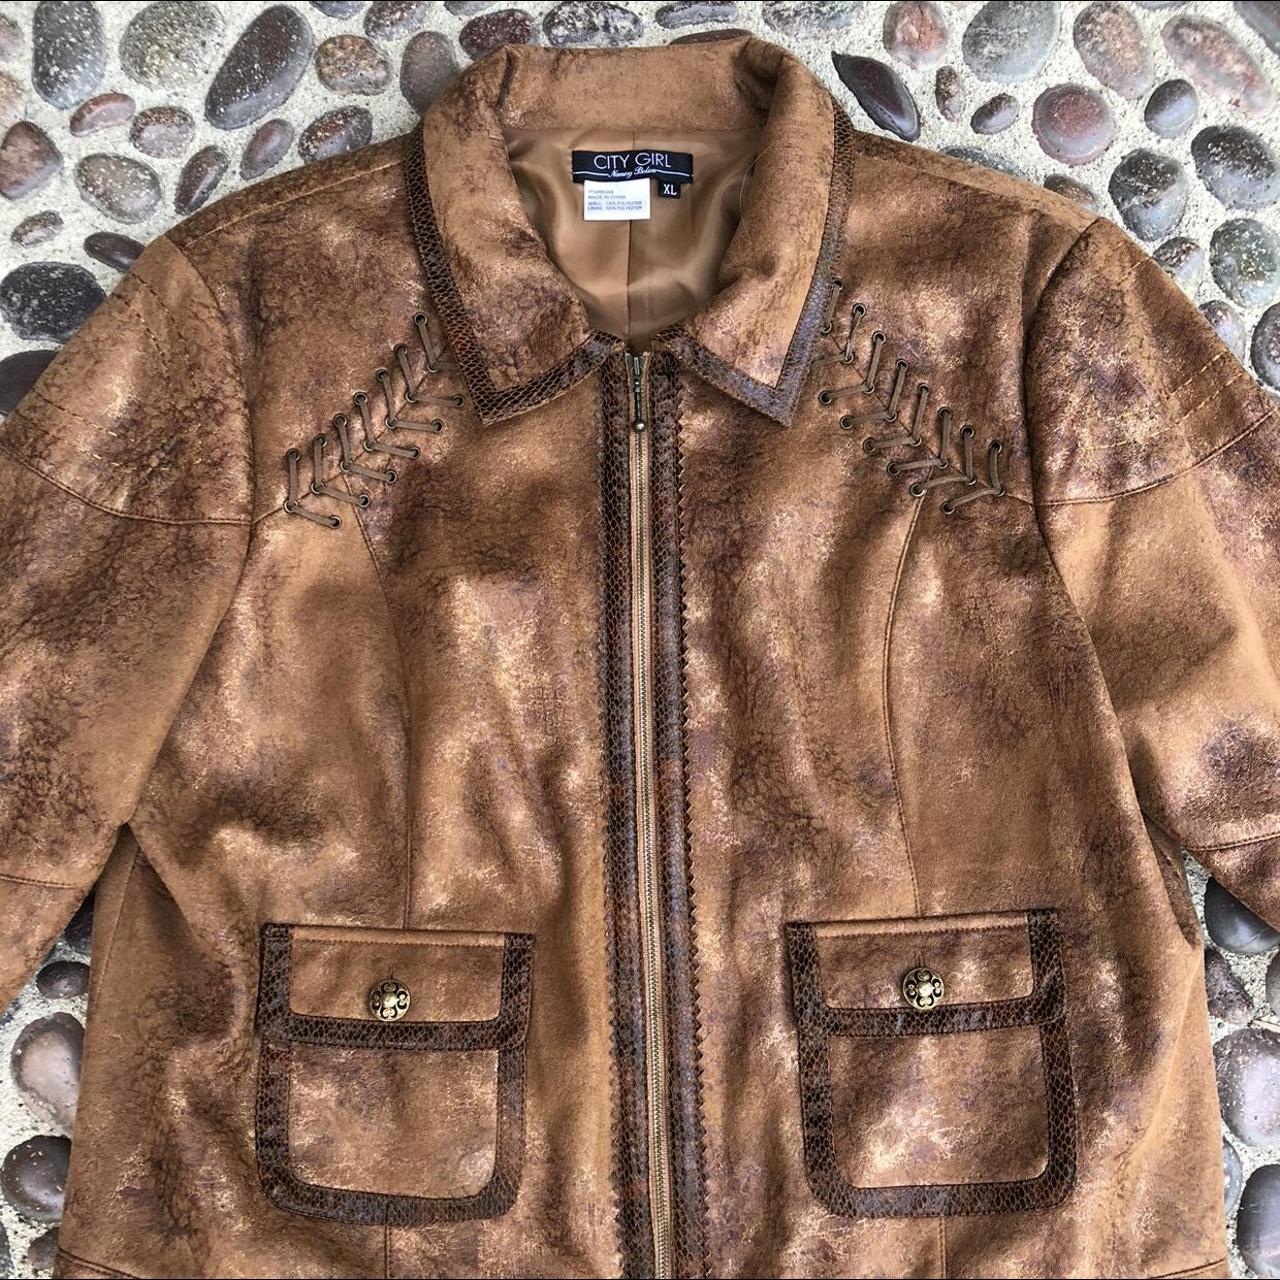 Faux Suede Jacket, Light Brown